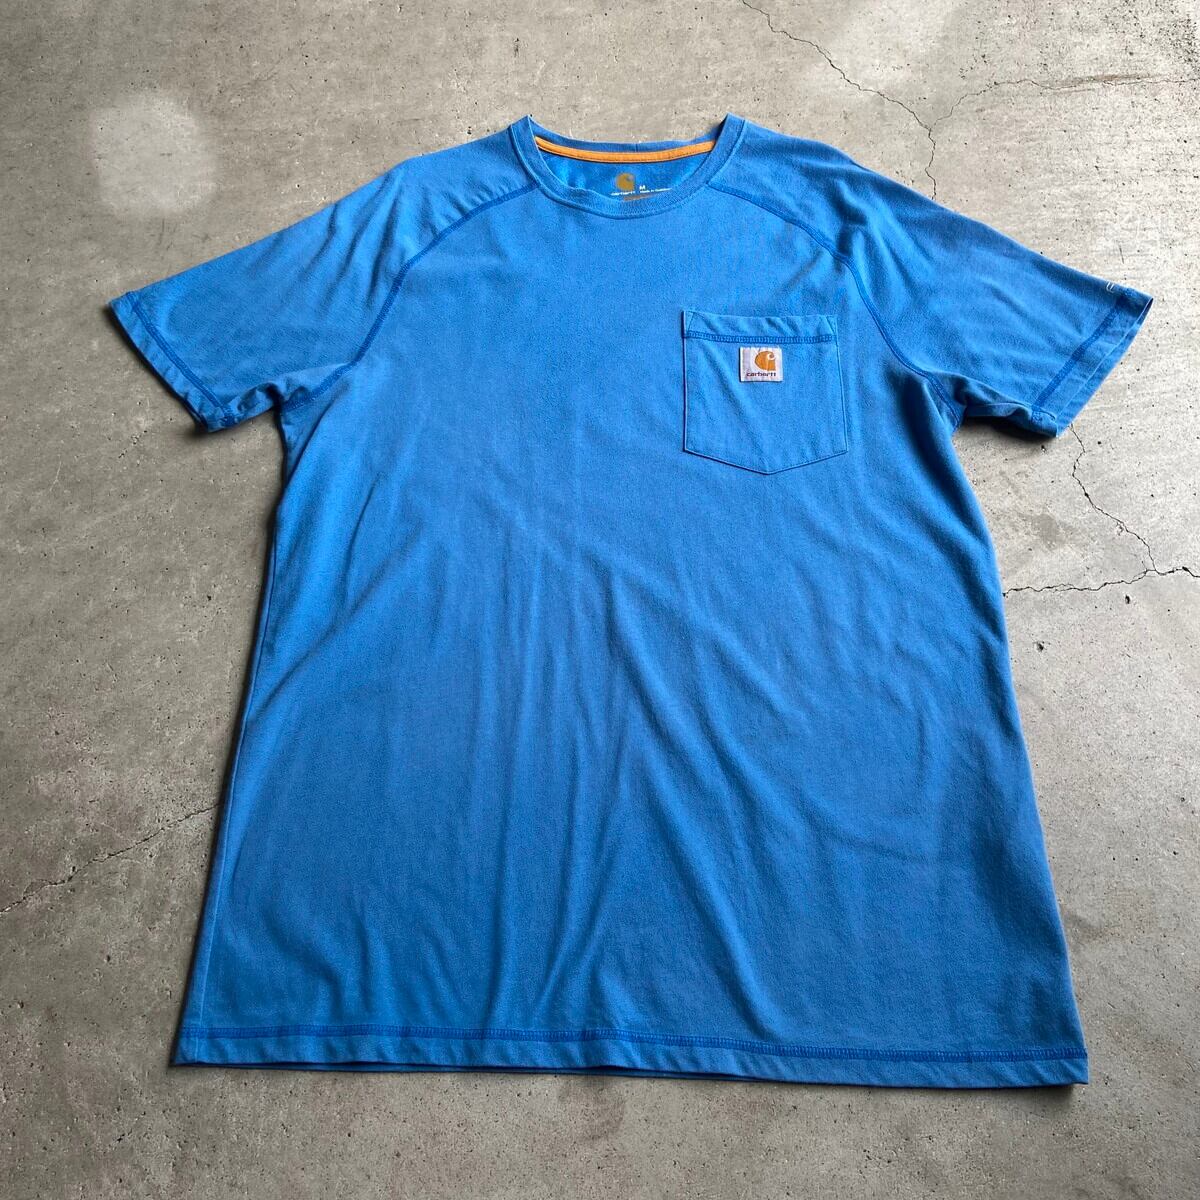 Carhartt FORCE カーハート ワンポイントロゴ ポケットTシャツ RELAXED FIT メンズM相当 古着 水色  ポケT【Tシャツ】【P2000】 | cave 古着屋【公式】古着通販サイト powered by BASE